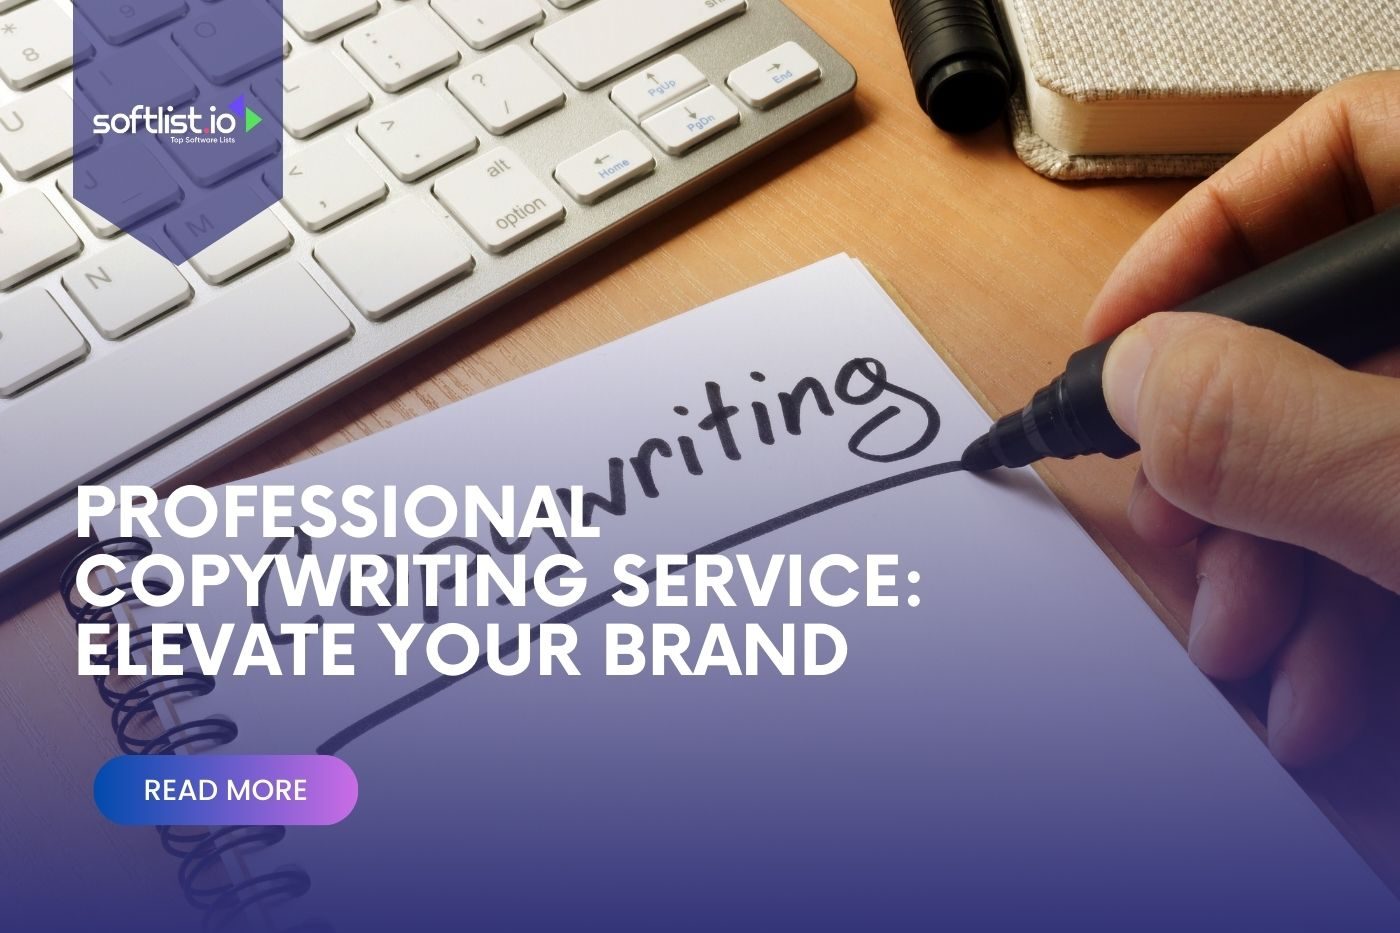 The Top Benefits of Hiring a Professional Copywriting Service